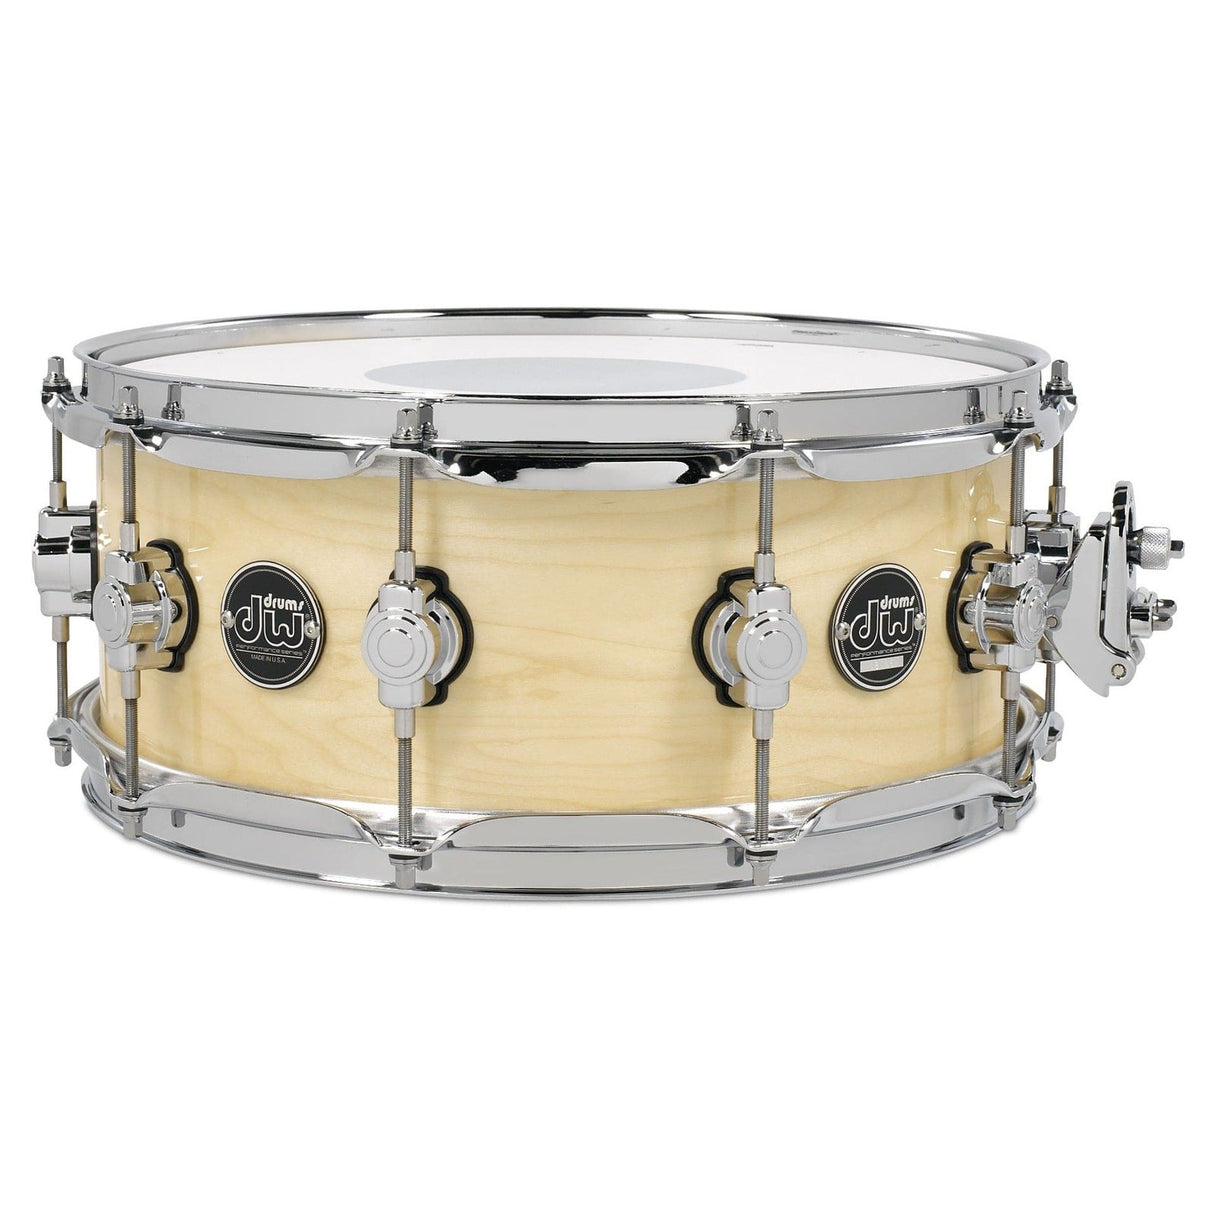 DW Performance Snare Drum 14x5.5 Natural Lacquer